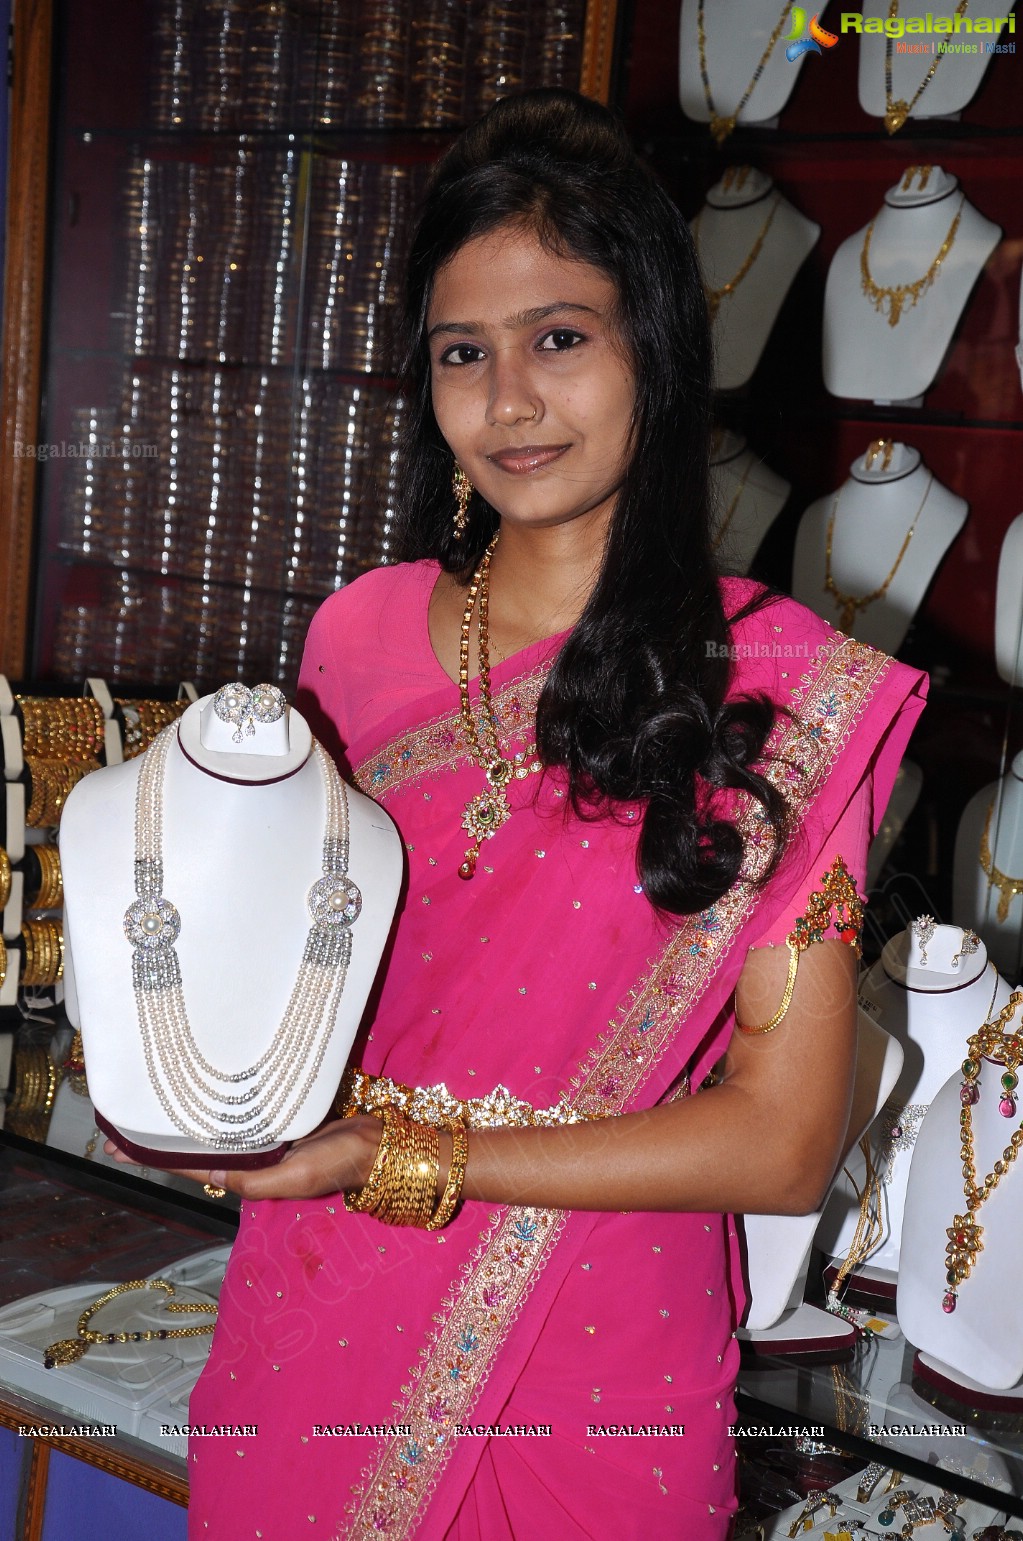 New Collection of Imitation Jewellery launch at New Victoria Pearls Showroom, Hyderabad